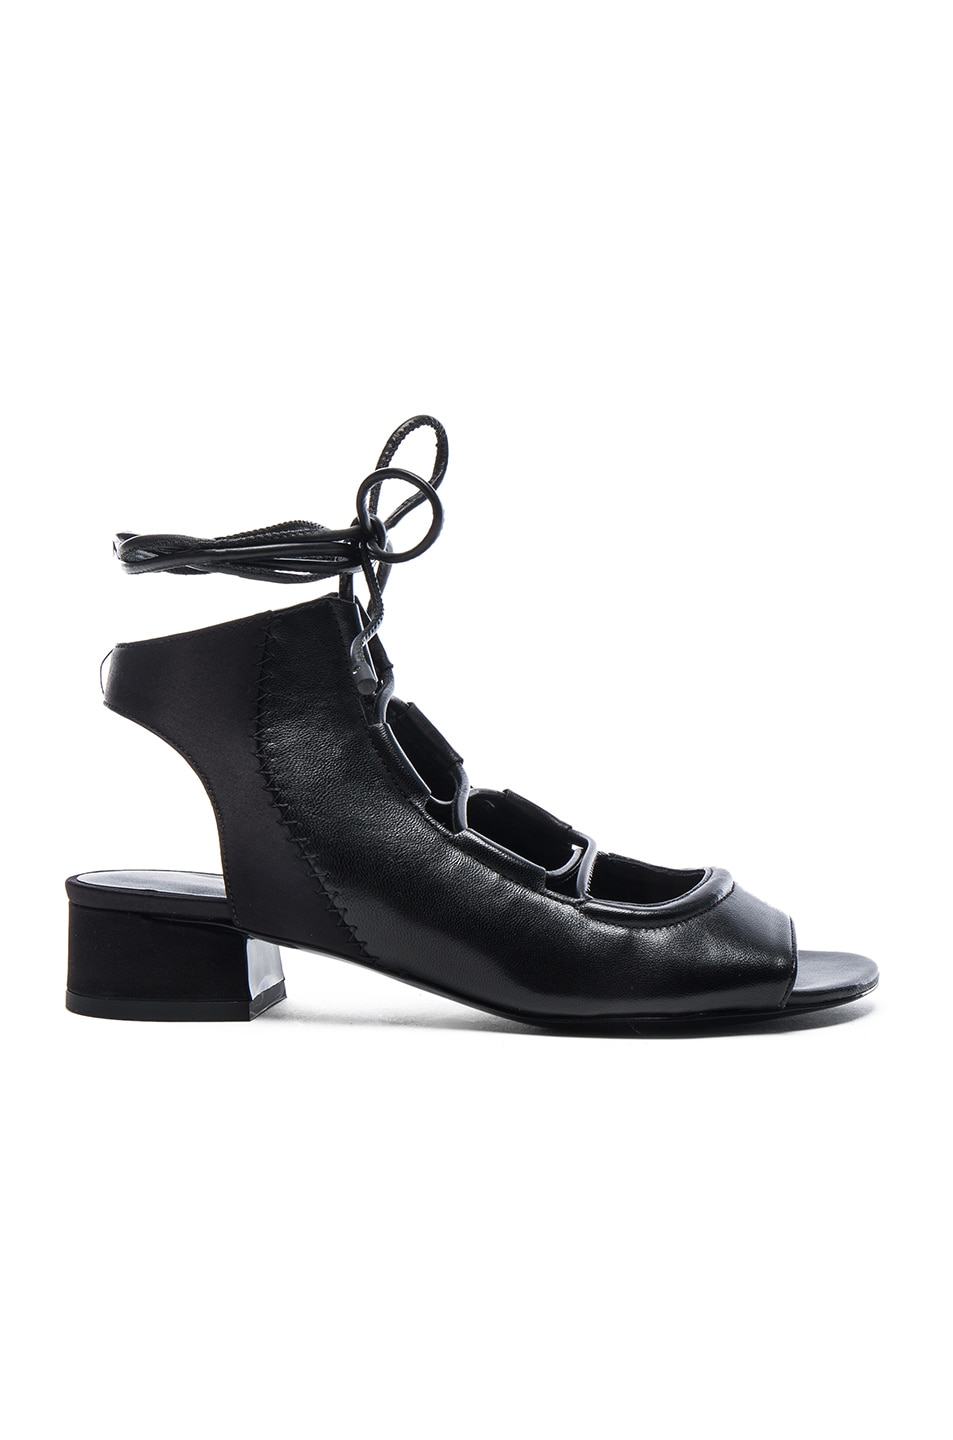 Image 1 of 3.1 phillip lim Leather Drum Lace Up Slingback Sandals in Black